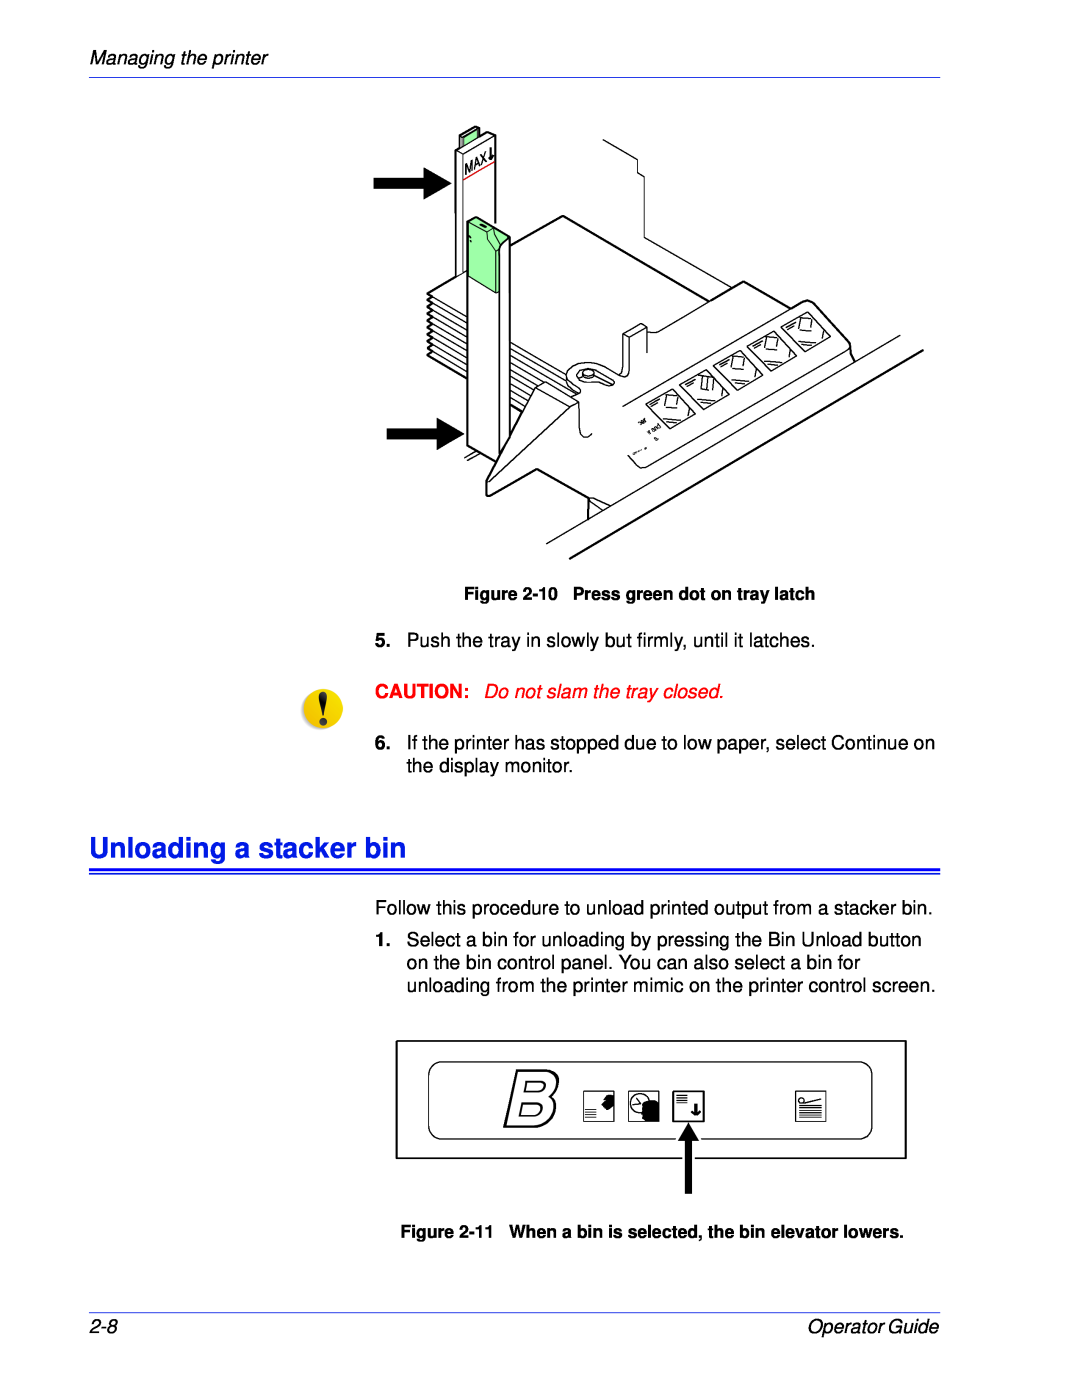 Xerox 100, 180 EPS manual Unloading a stacker bin, CAUTION: Do not slam the tray closed, Managing the printer 